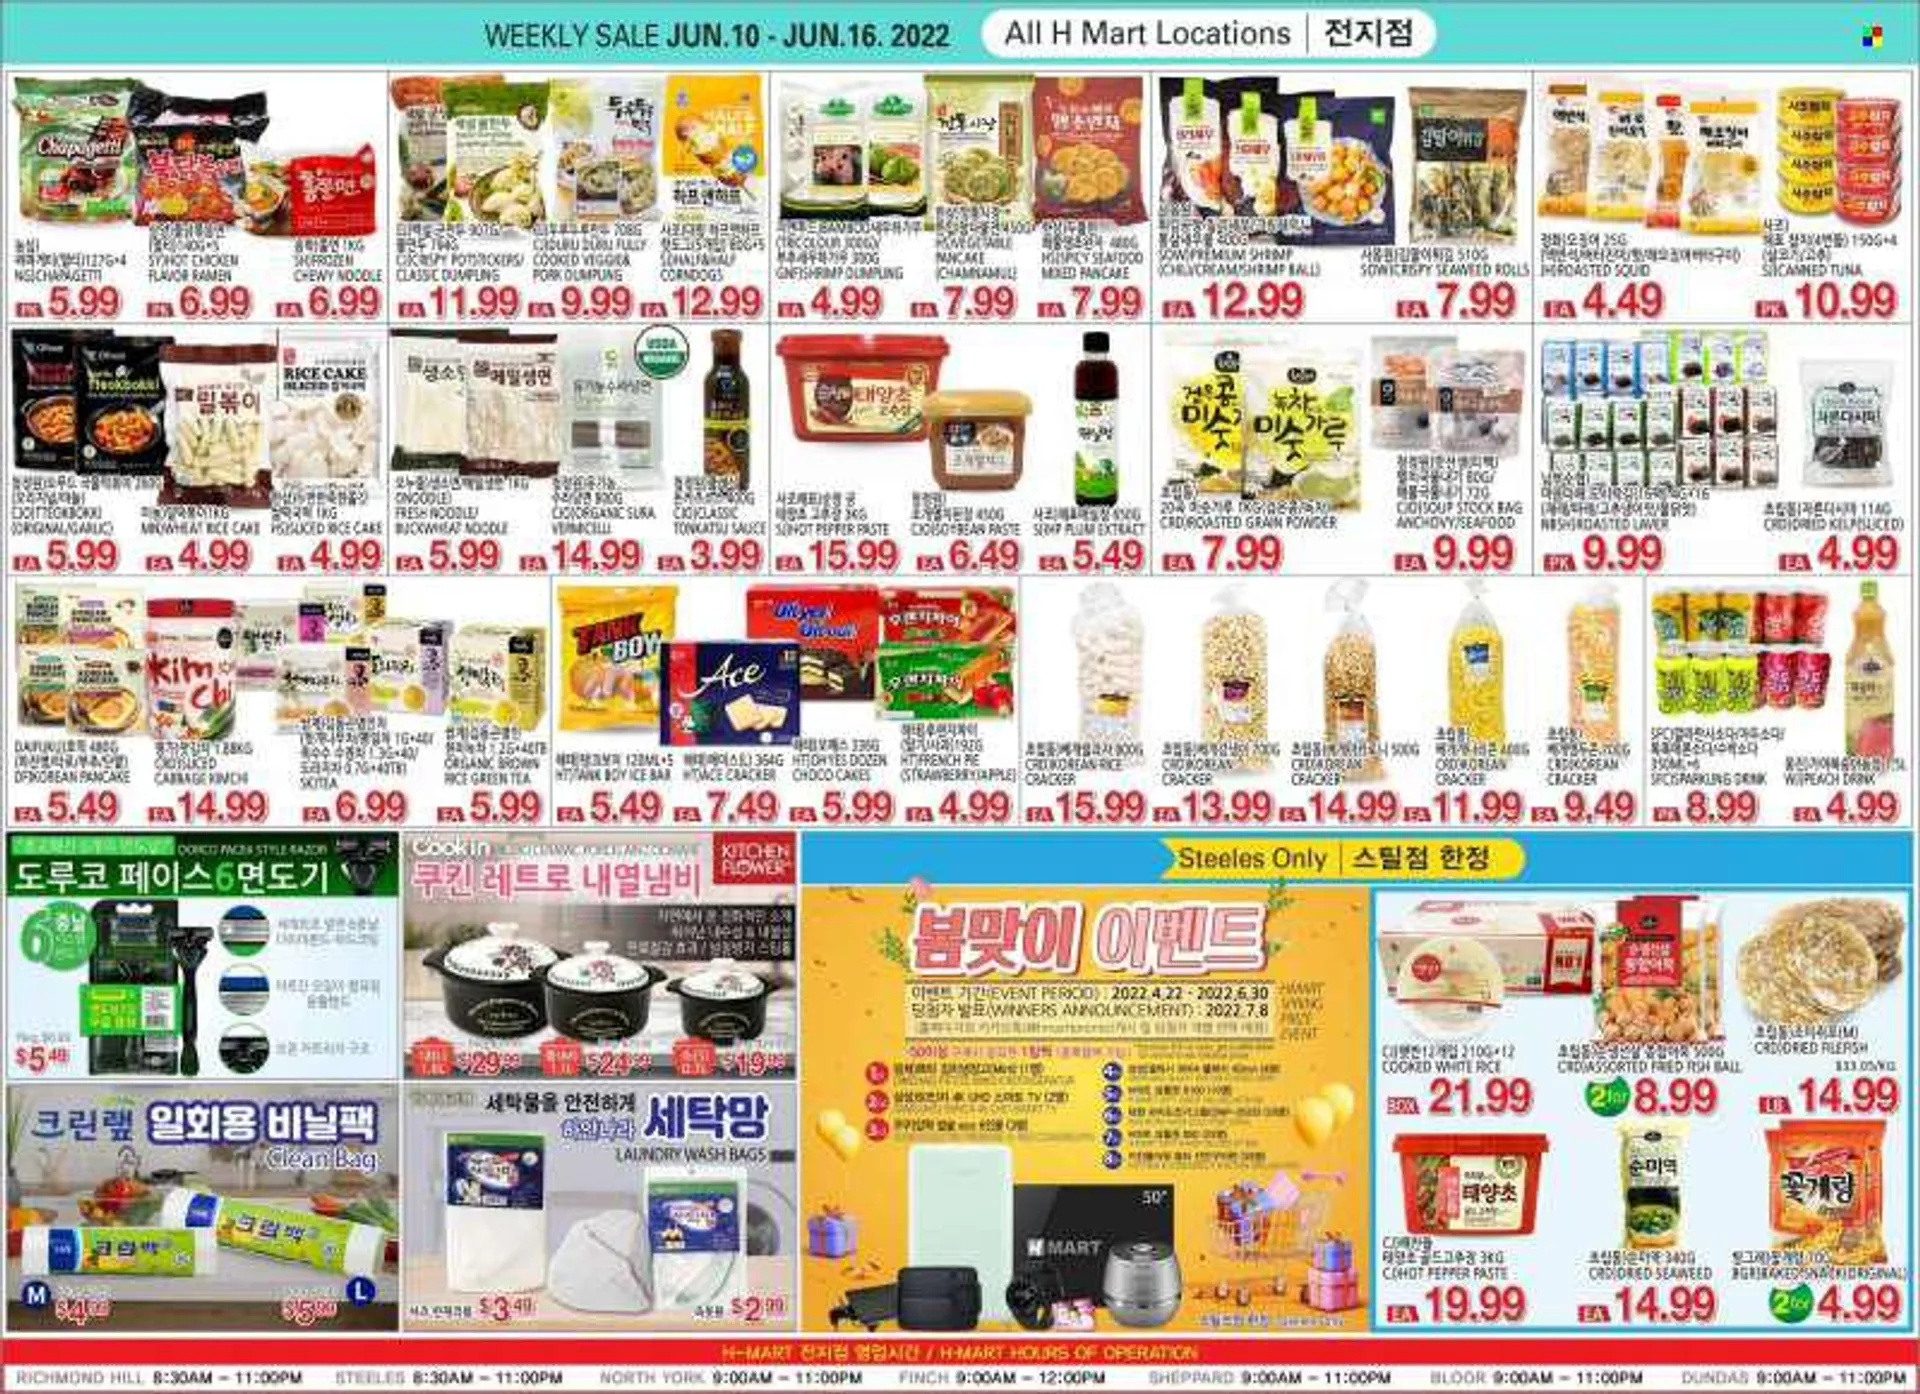 H Mart Flyer - June 10, 2022 - June 16, 2022 - Sales products - pie, cabbage, garlic, squid, tuna, seafood, shrimps, fried fish, ramen, soup, sauce, pancake, dumpling, noodles, snack, crackers, rice crackers, seaweed, anchovies, canned tuna, buckwheat, wh